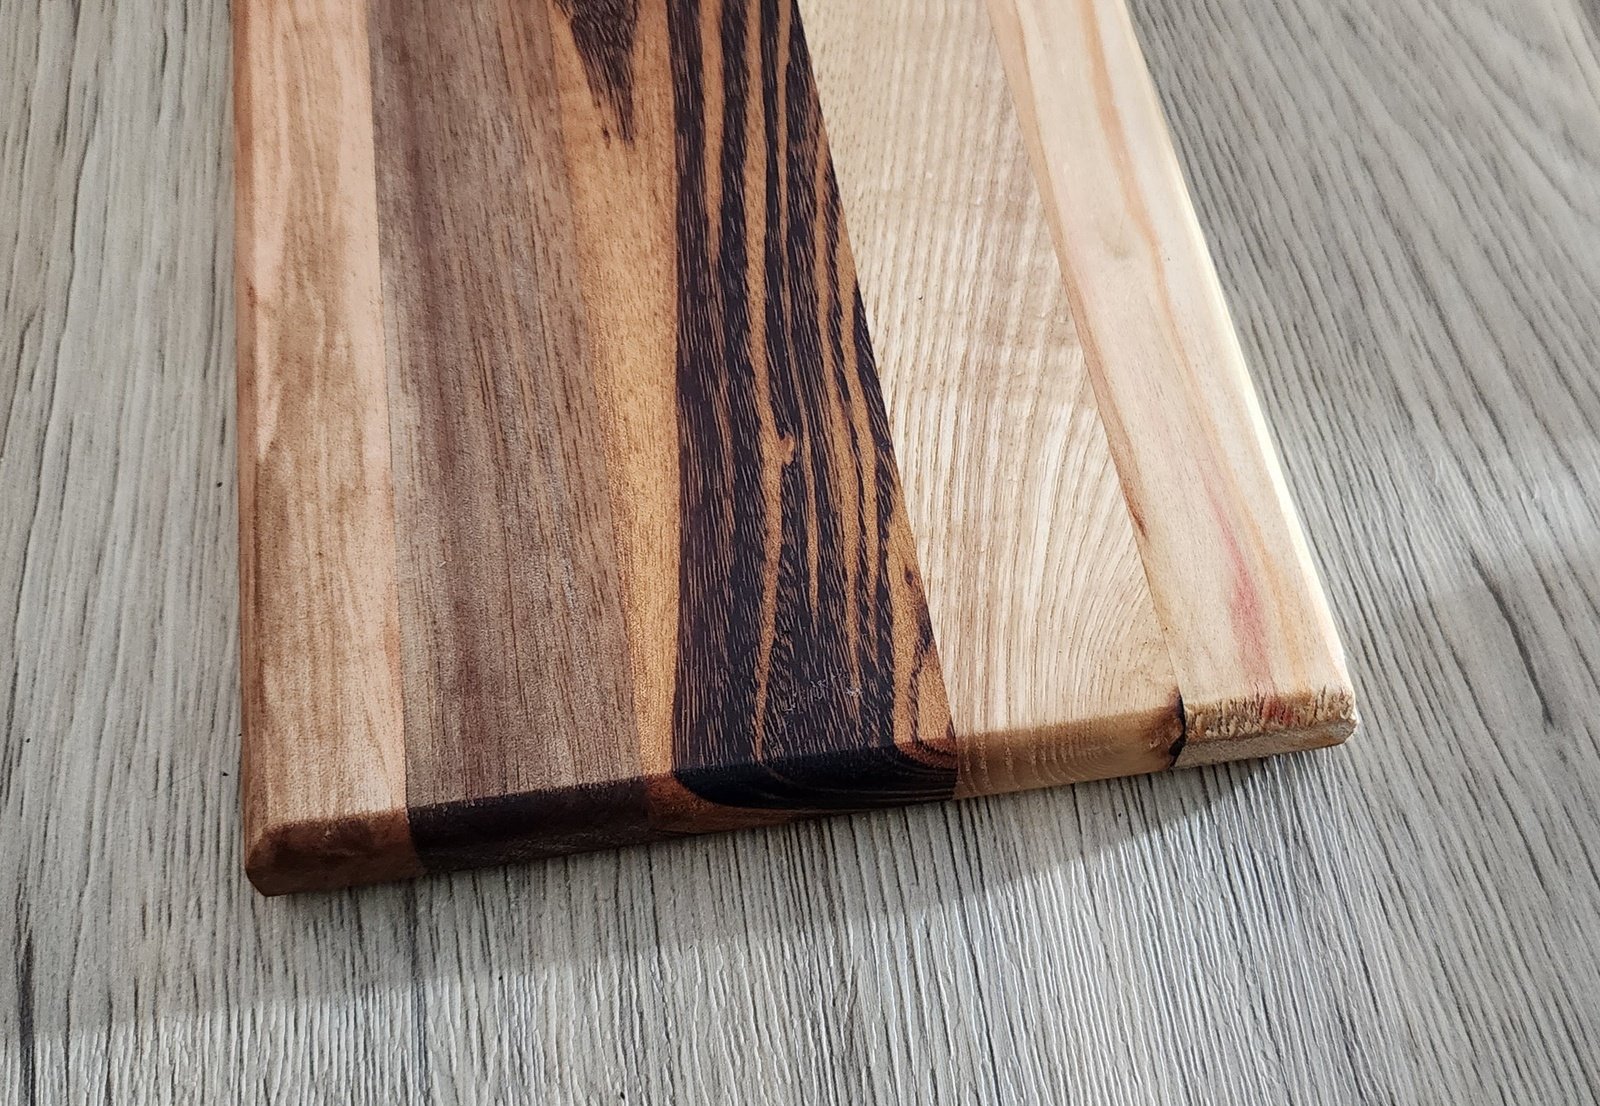 Hickory, Maple, Tiger and Walnut Cutting Board